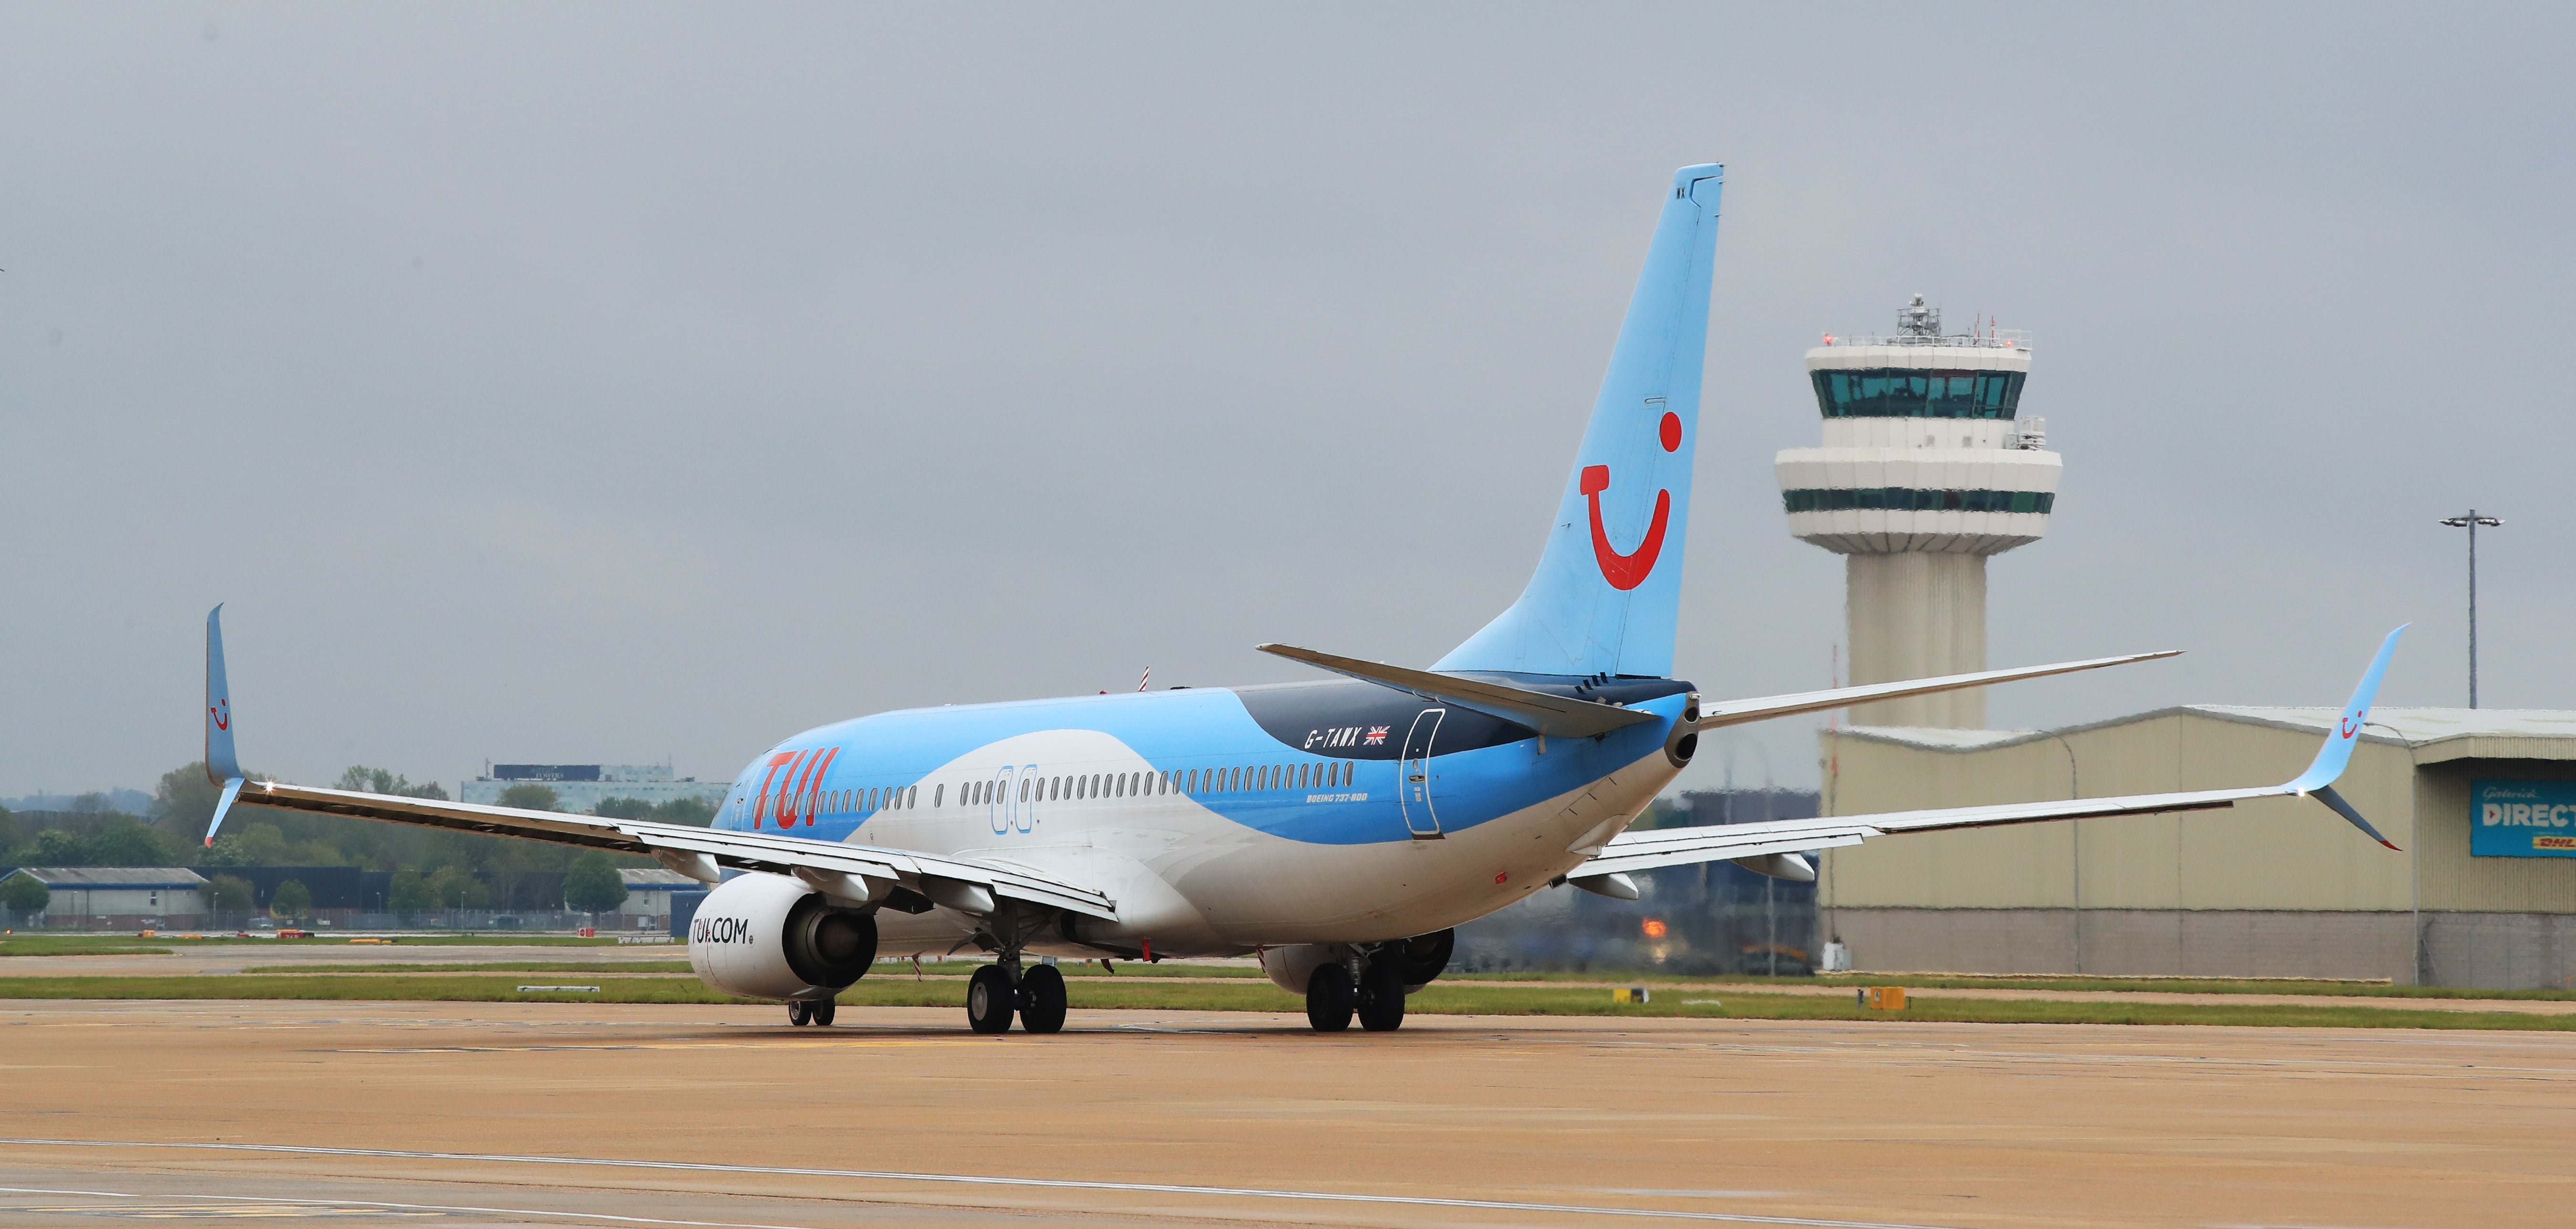 The incident occurred on a Tui flight